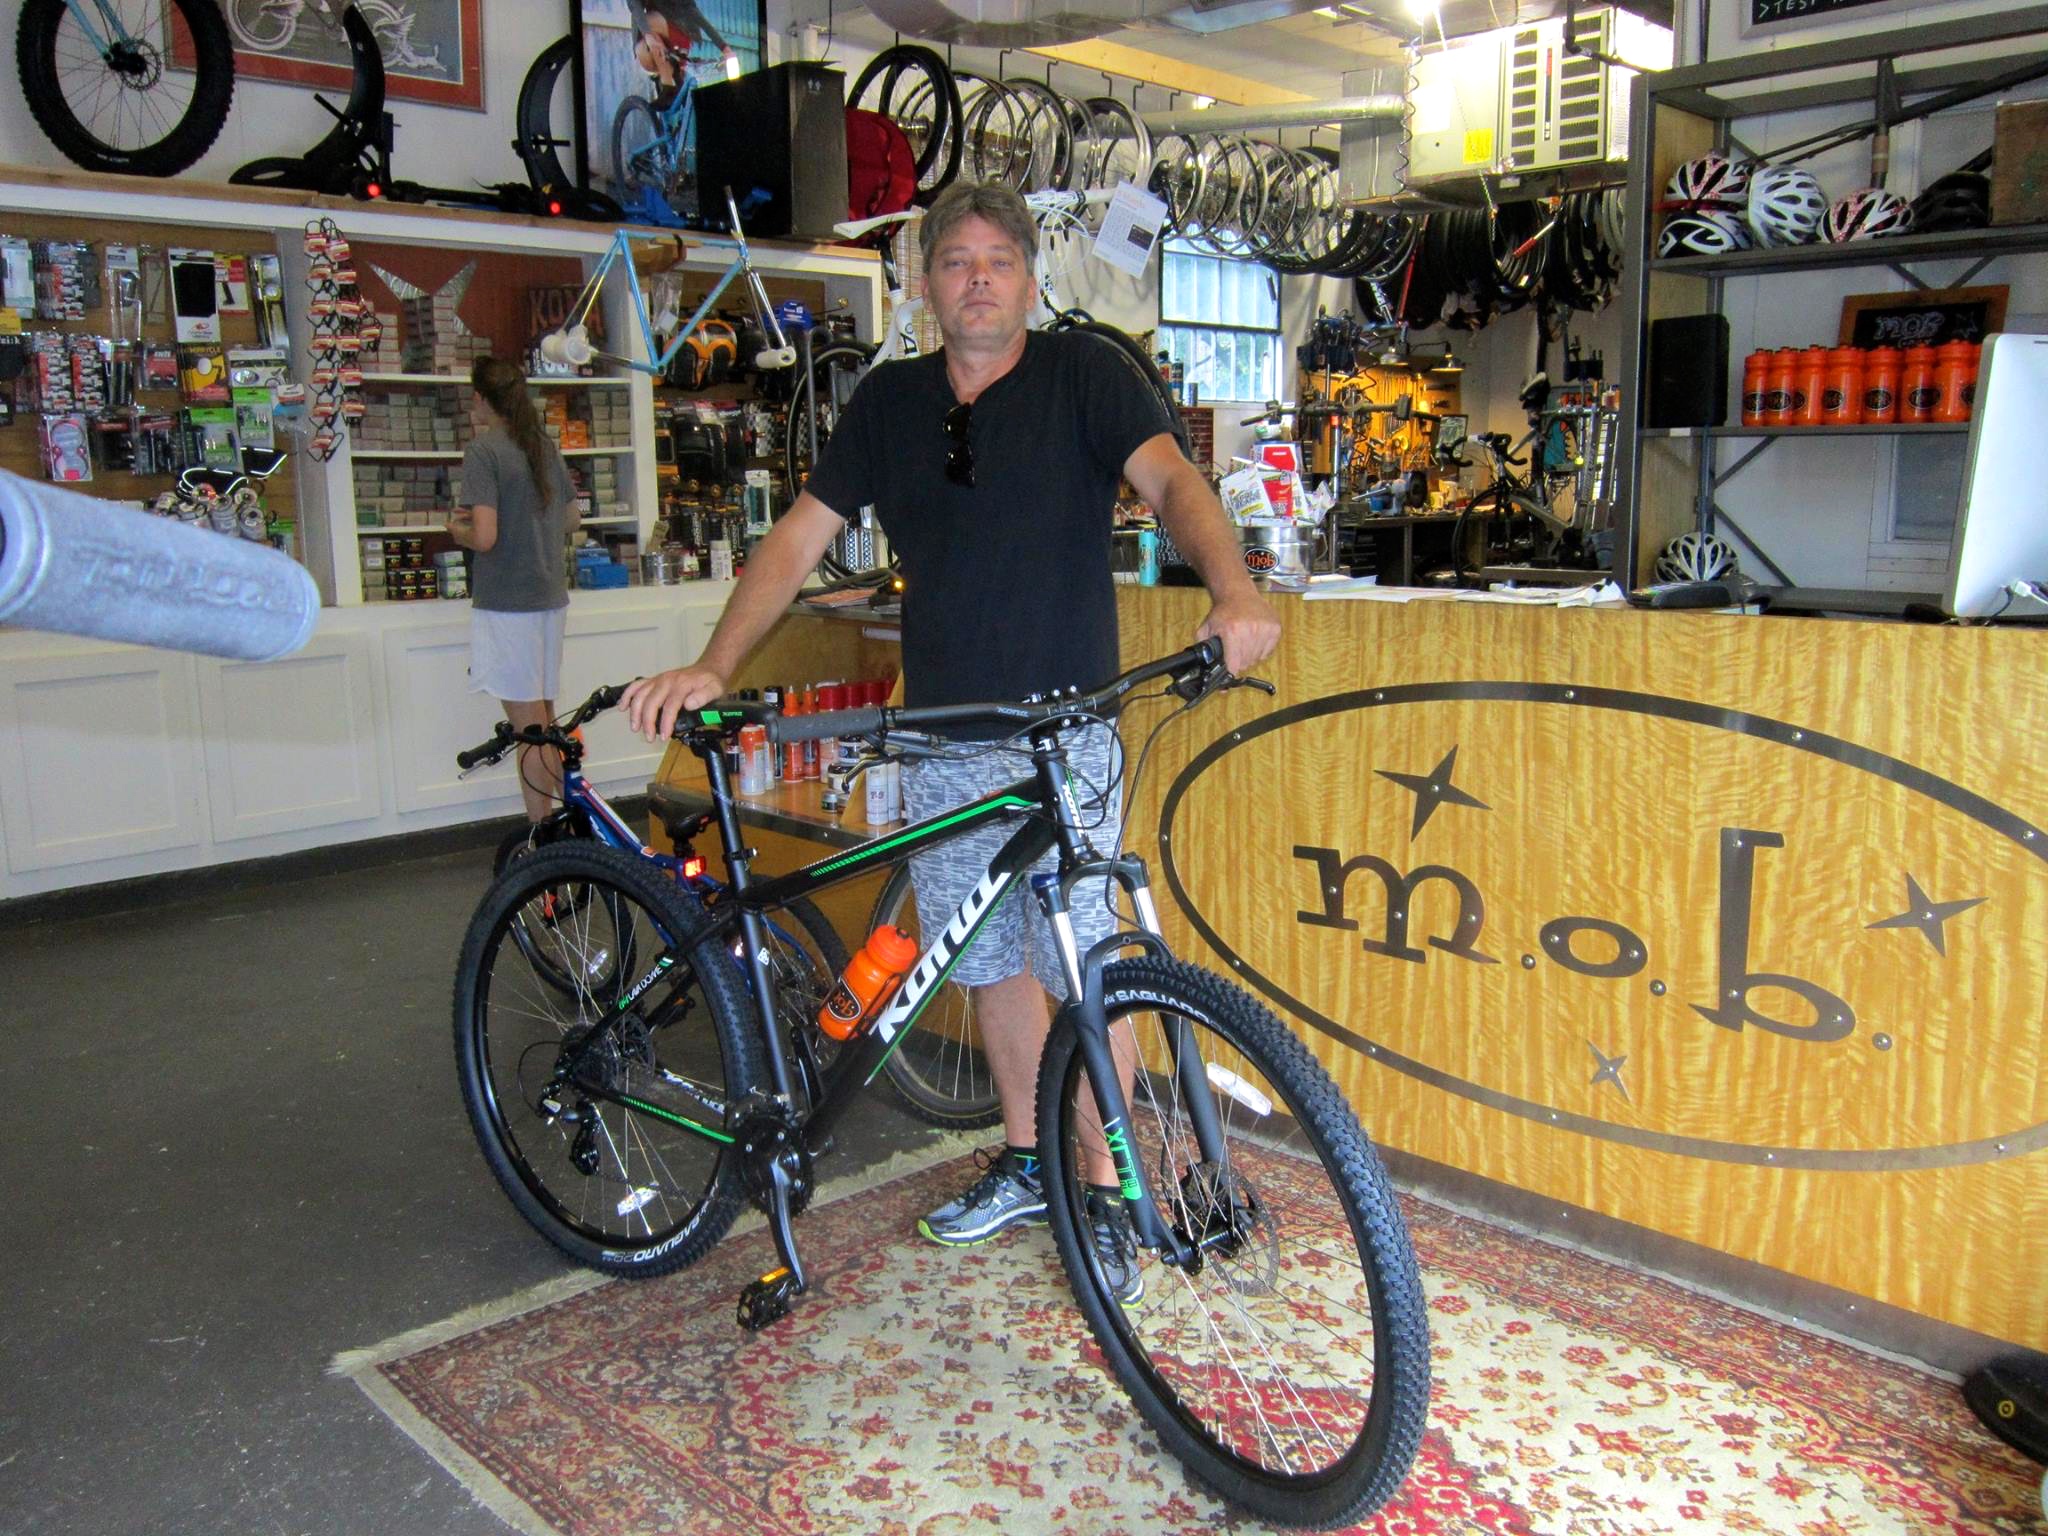 Mike with his new Kona Lava Dome. He will enjoy the speed of his new Kona Bicycle’s 29 inch tires and the powerful stopping power of it’s hydraulic disc brakes. Looking Good!